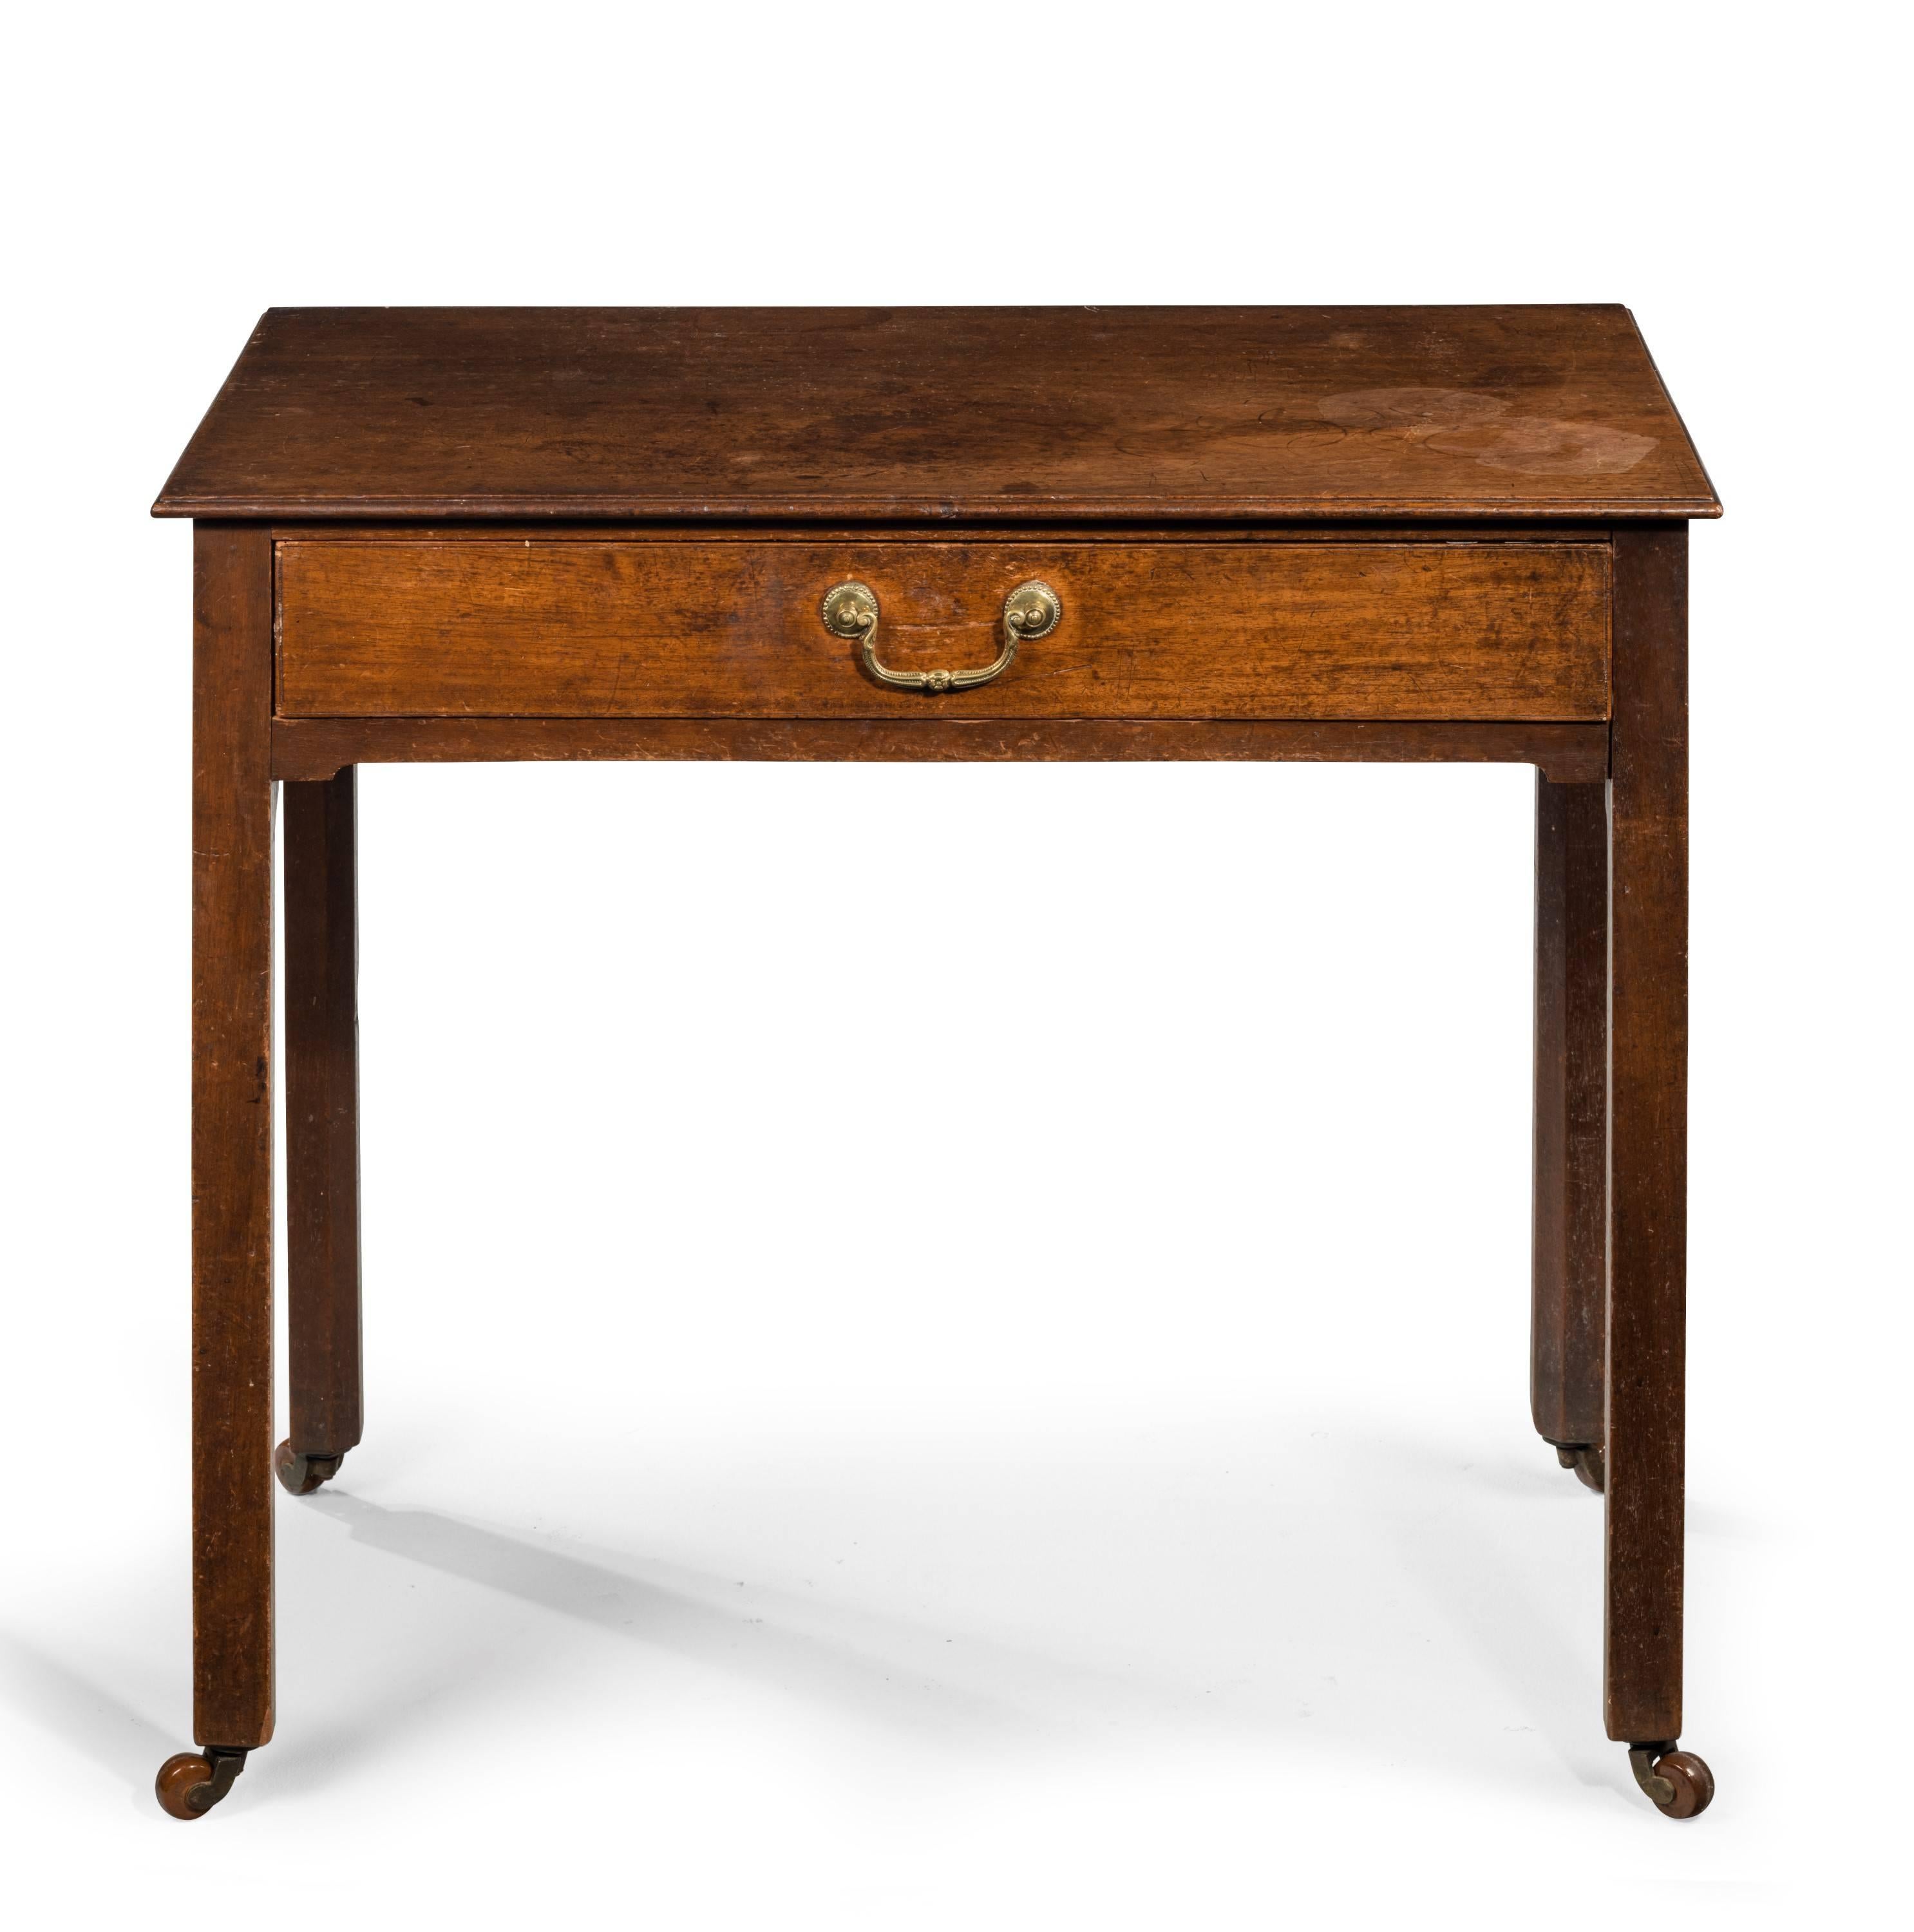 A good George III period mahogany side table. Single drawer, with very good original cast handle. Very well figured timber. Excellent original patina.